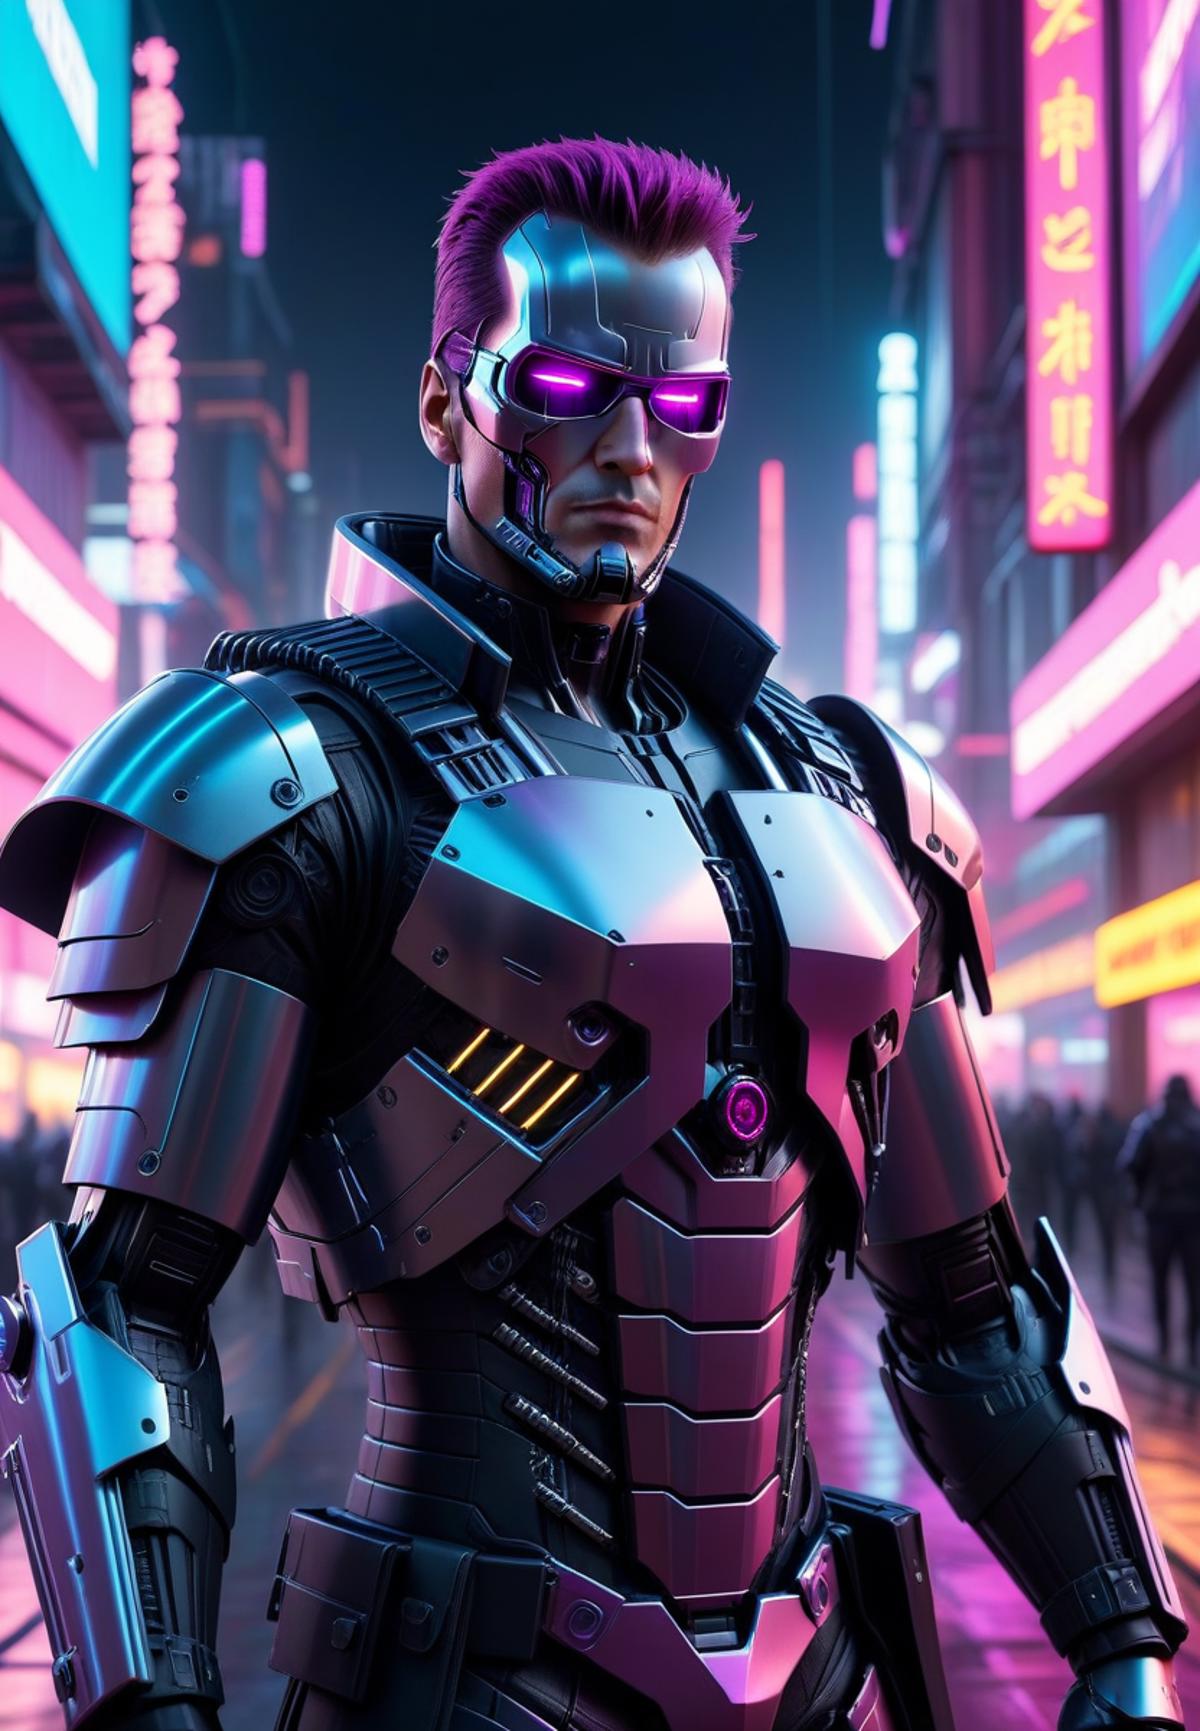 The Cyborg Man: A Futuristic Comic Book Character with Pink Neon Background